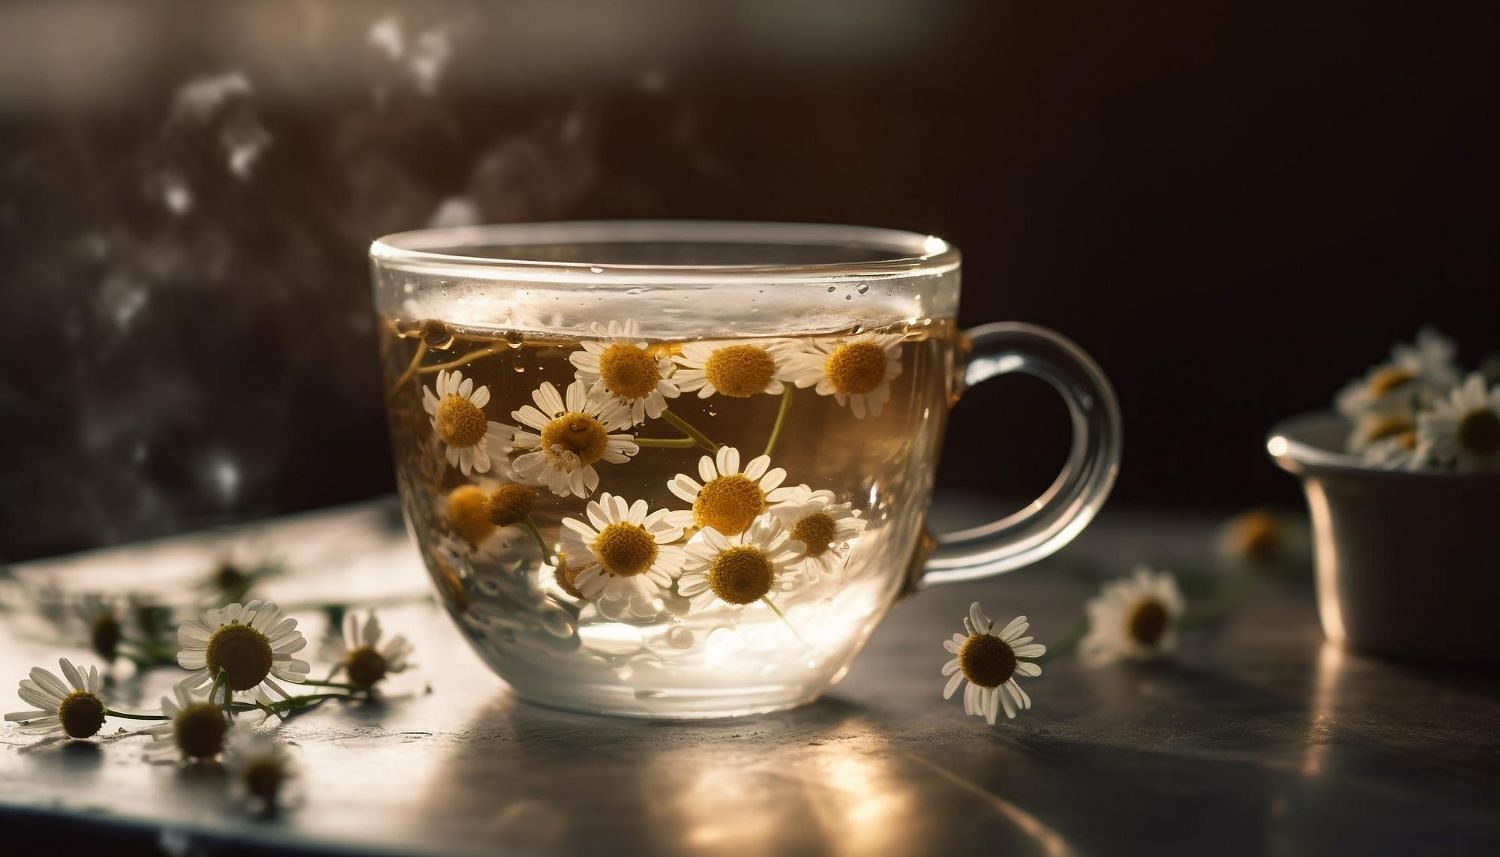 Chamomile has a soothing and relaxing sensation. (Image via Freepik/ Djvstock)